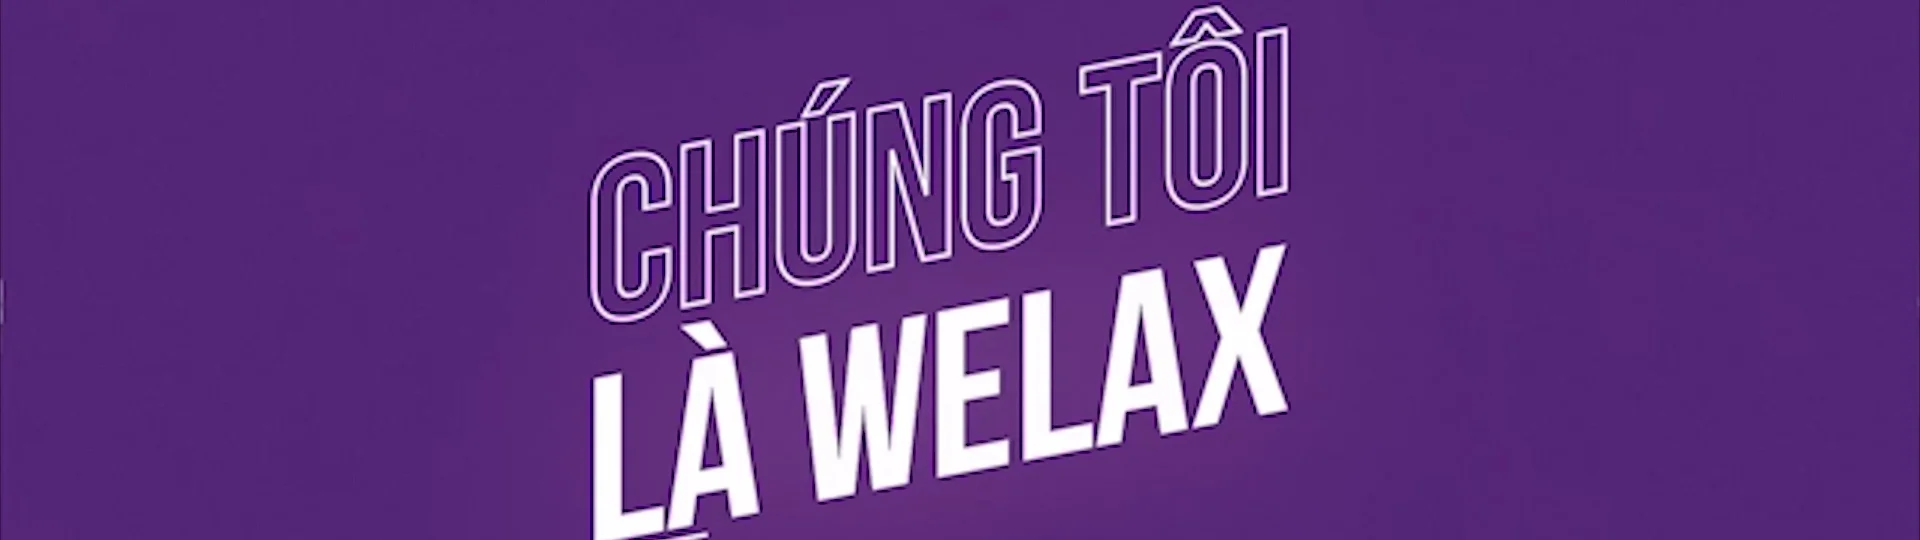 WeLax .vn's cover photo